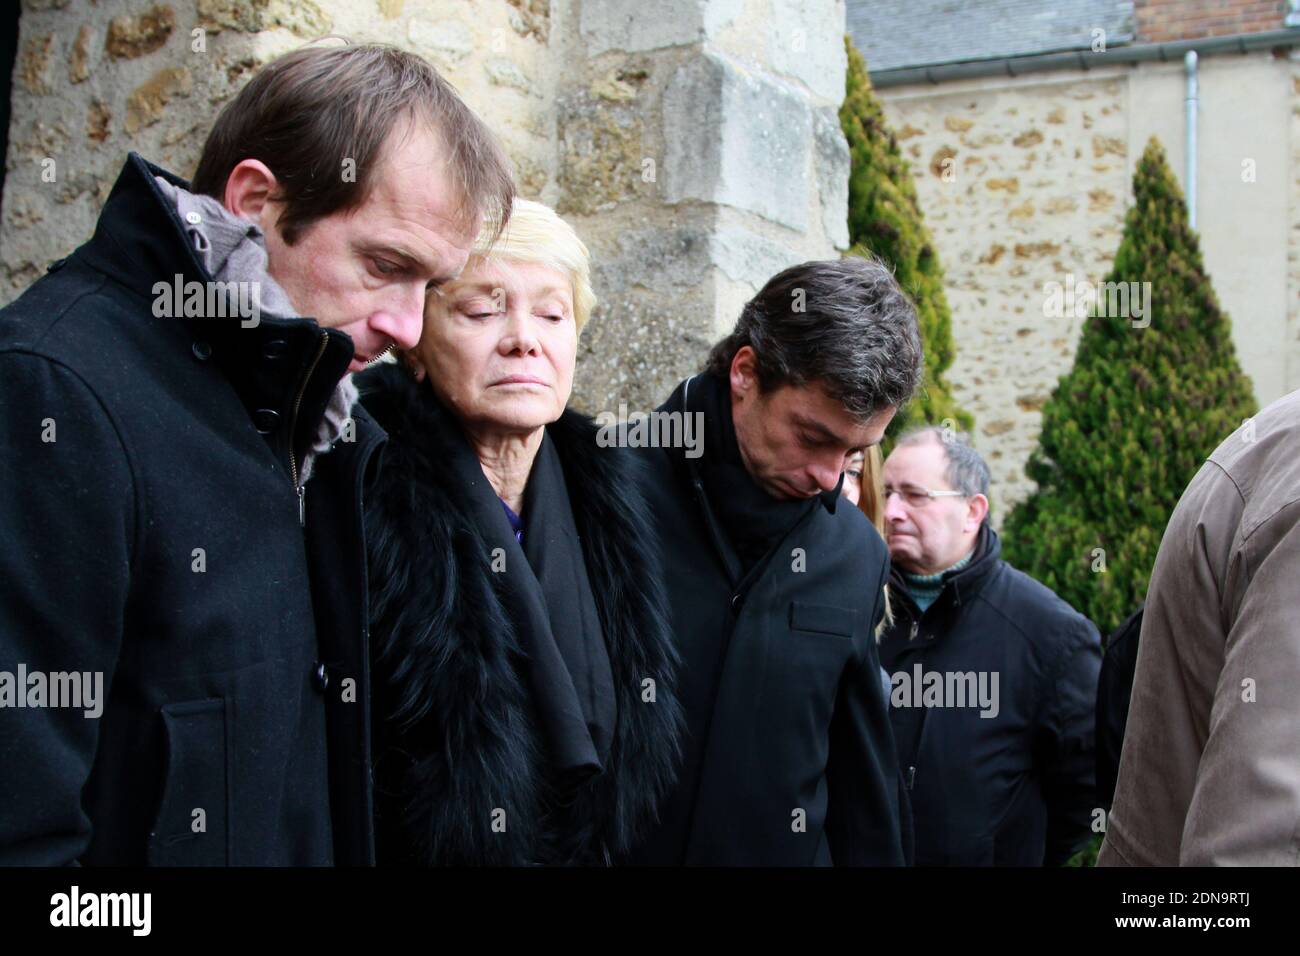 Jacqueline Beltoise with her sons Julien and Anthony attending the Jean-Pierre  Beltoise funeral ceremony in Saint-Vrain, France on January 12, 2015. Photo  by ABACAPRESS.COM Stock Photo - Alamy